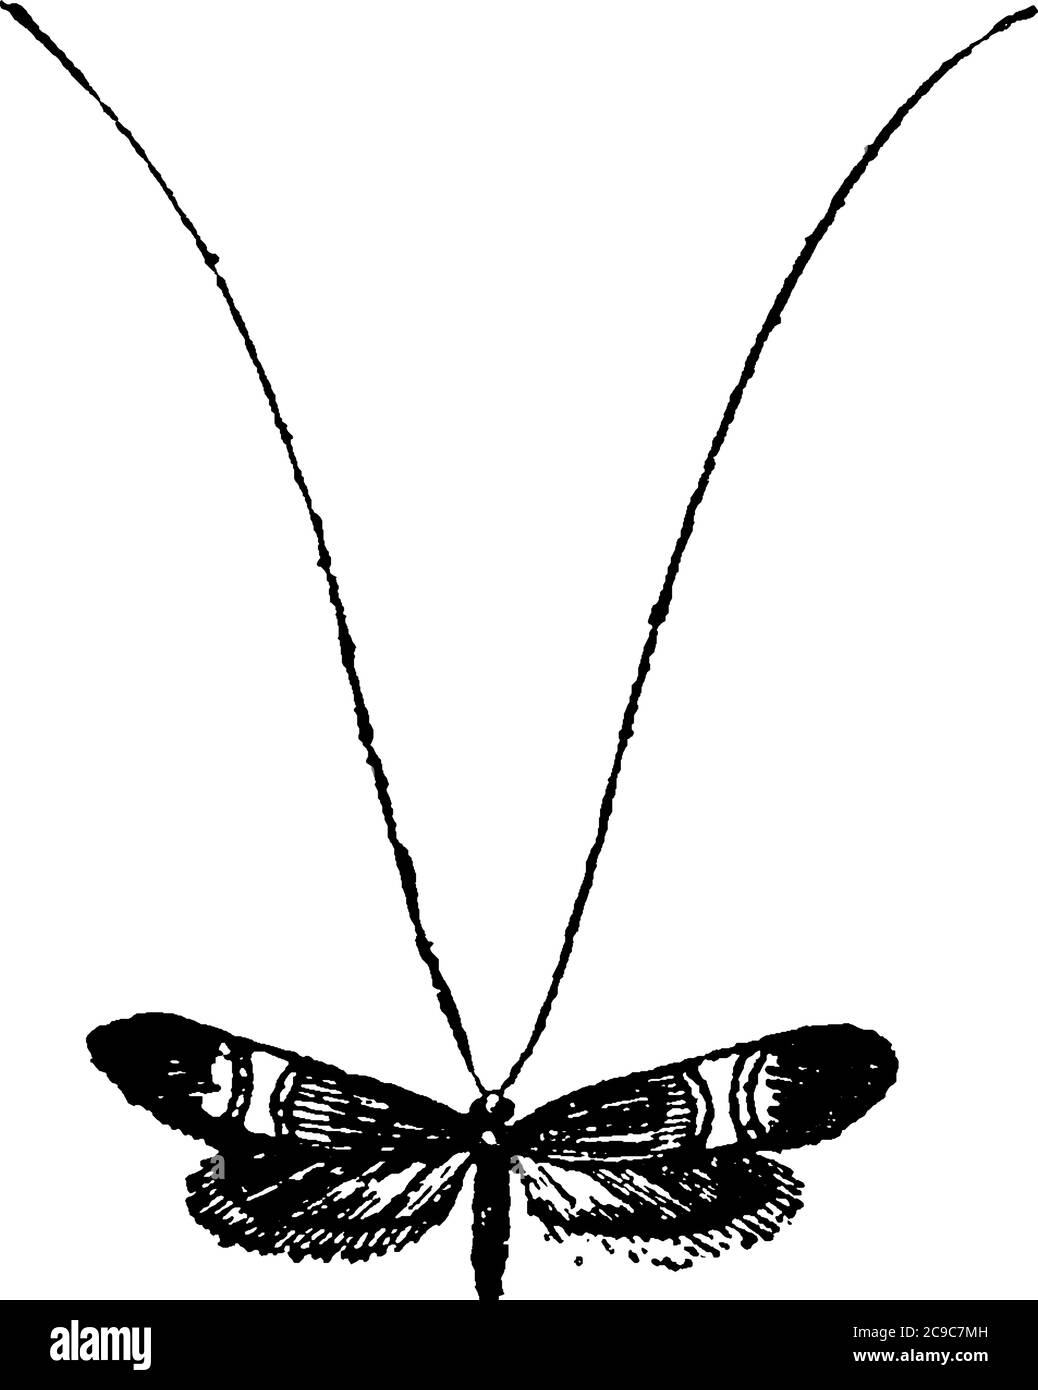 The moth with different thick patterns running through their forewings and hindwings has a very long and slender antenna, vintage line drawing or engr Stock Vector